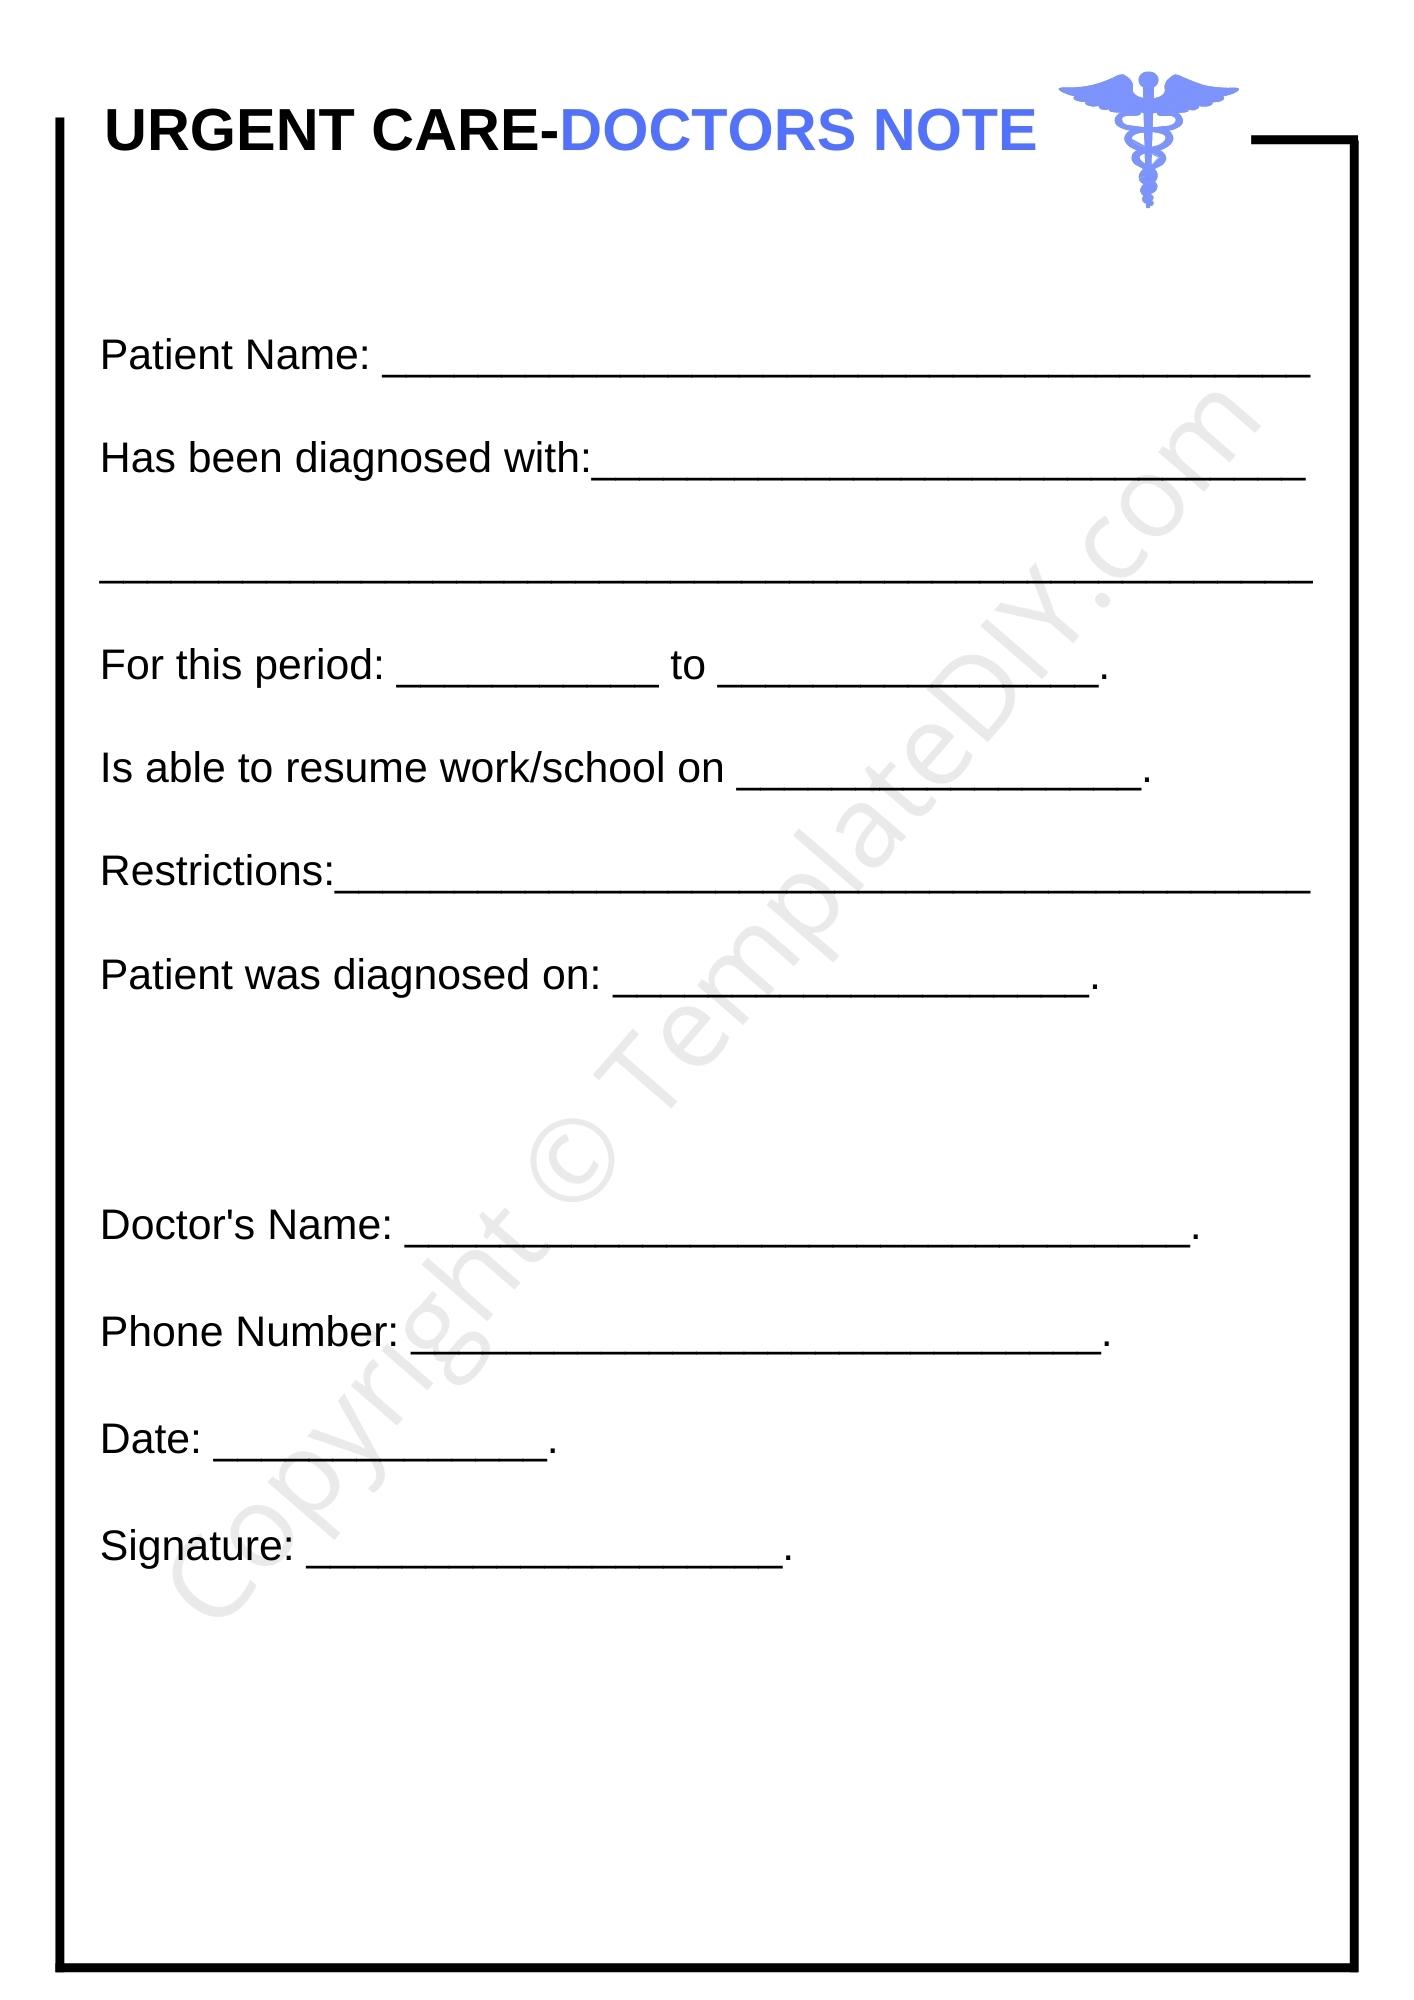 urgent-care-doctors-note-printable-template-in-pdf-word